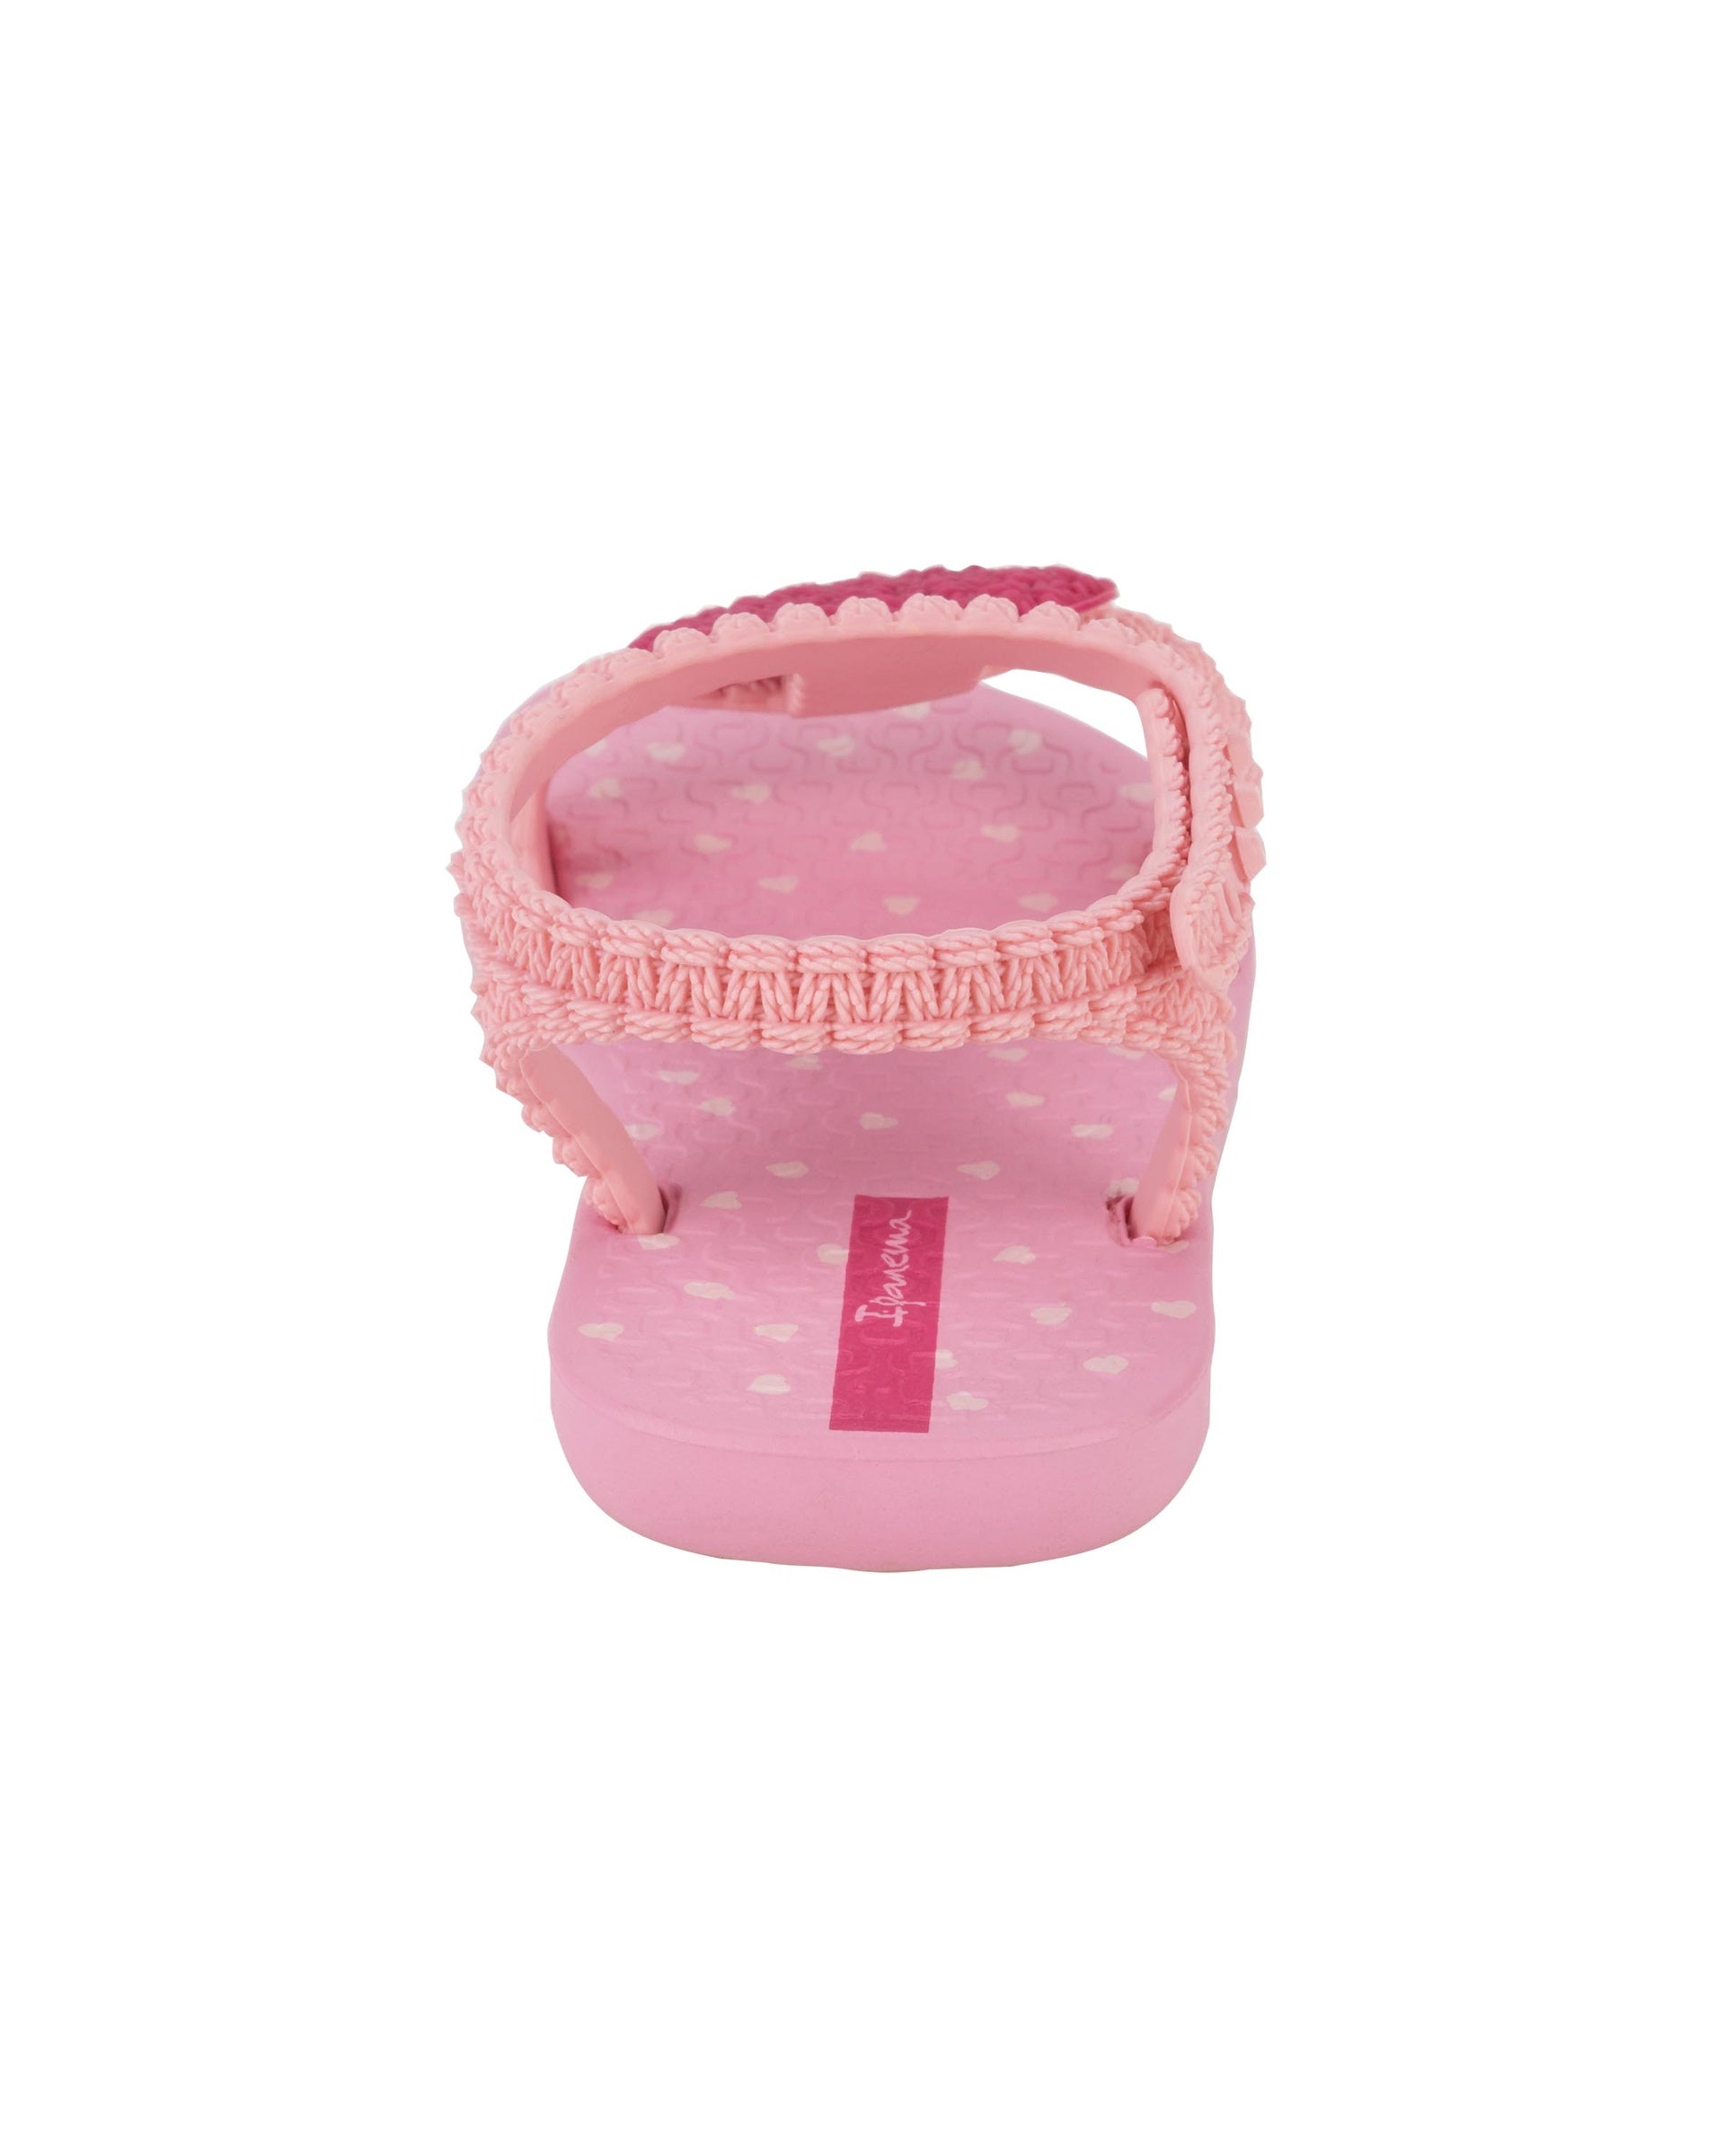 Top side view of a pink Ipanema My First Ipanema baby sandal with pink heart on top and crochet texture .